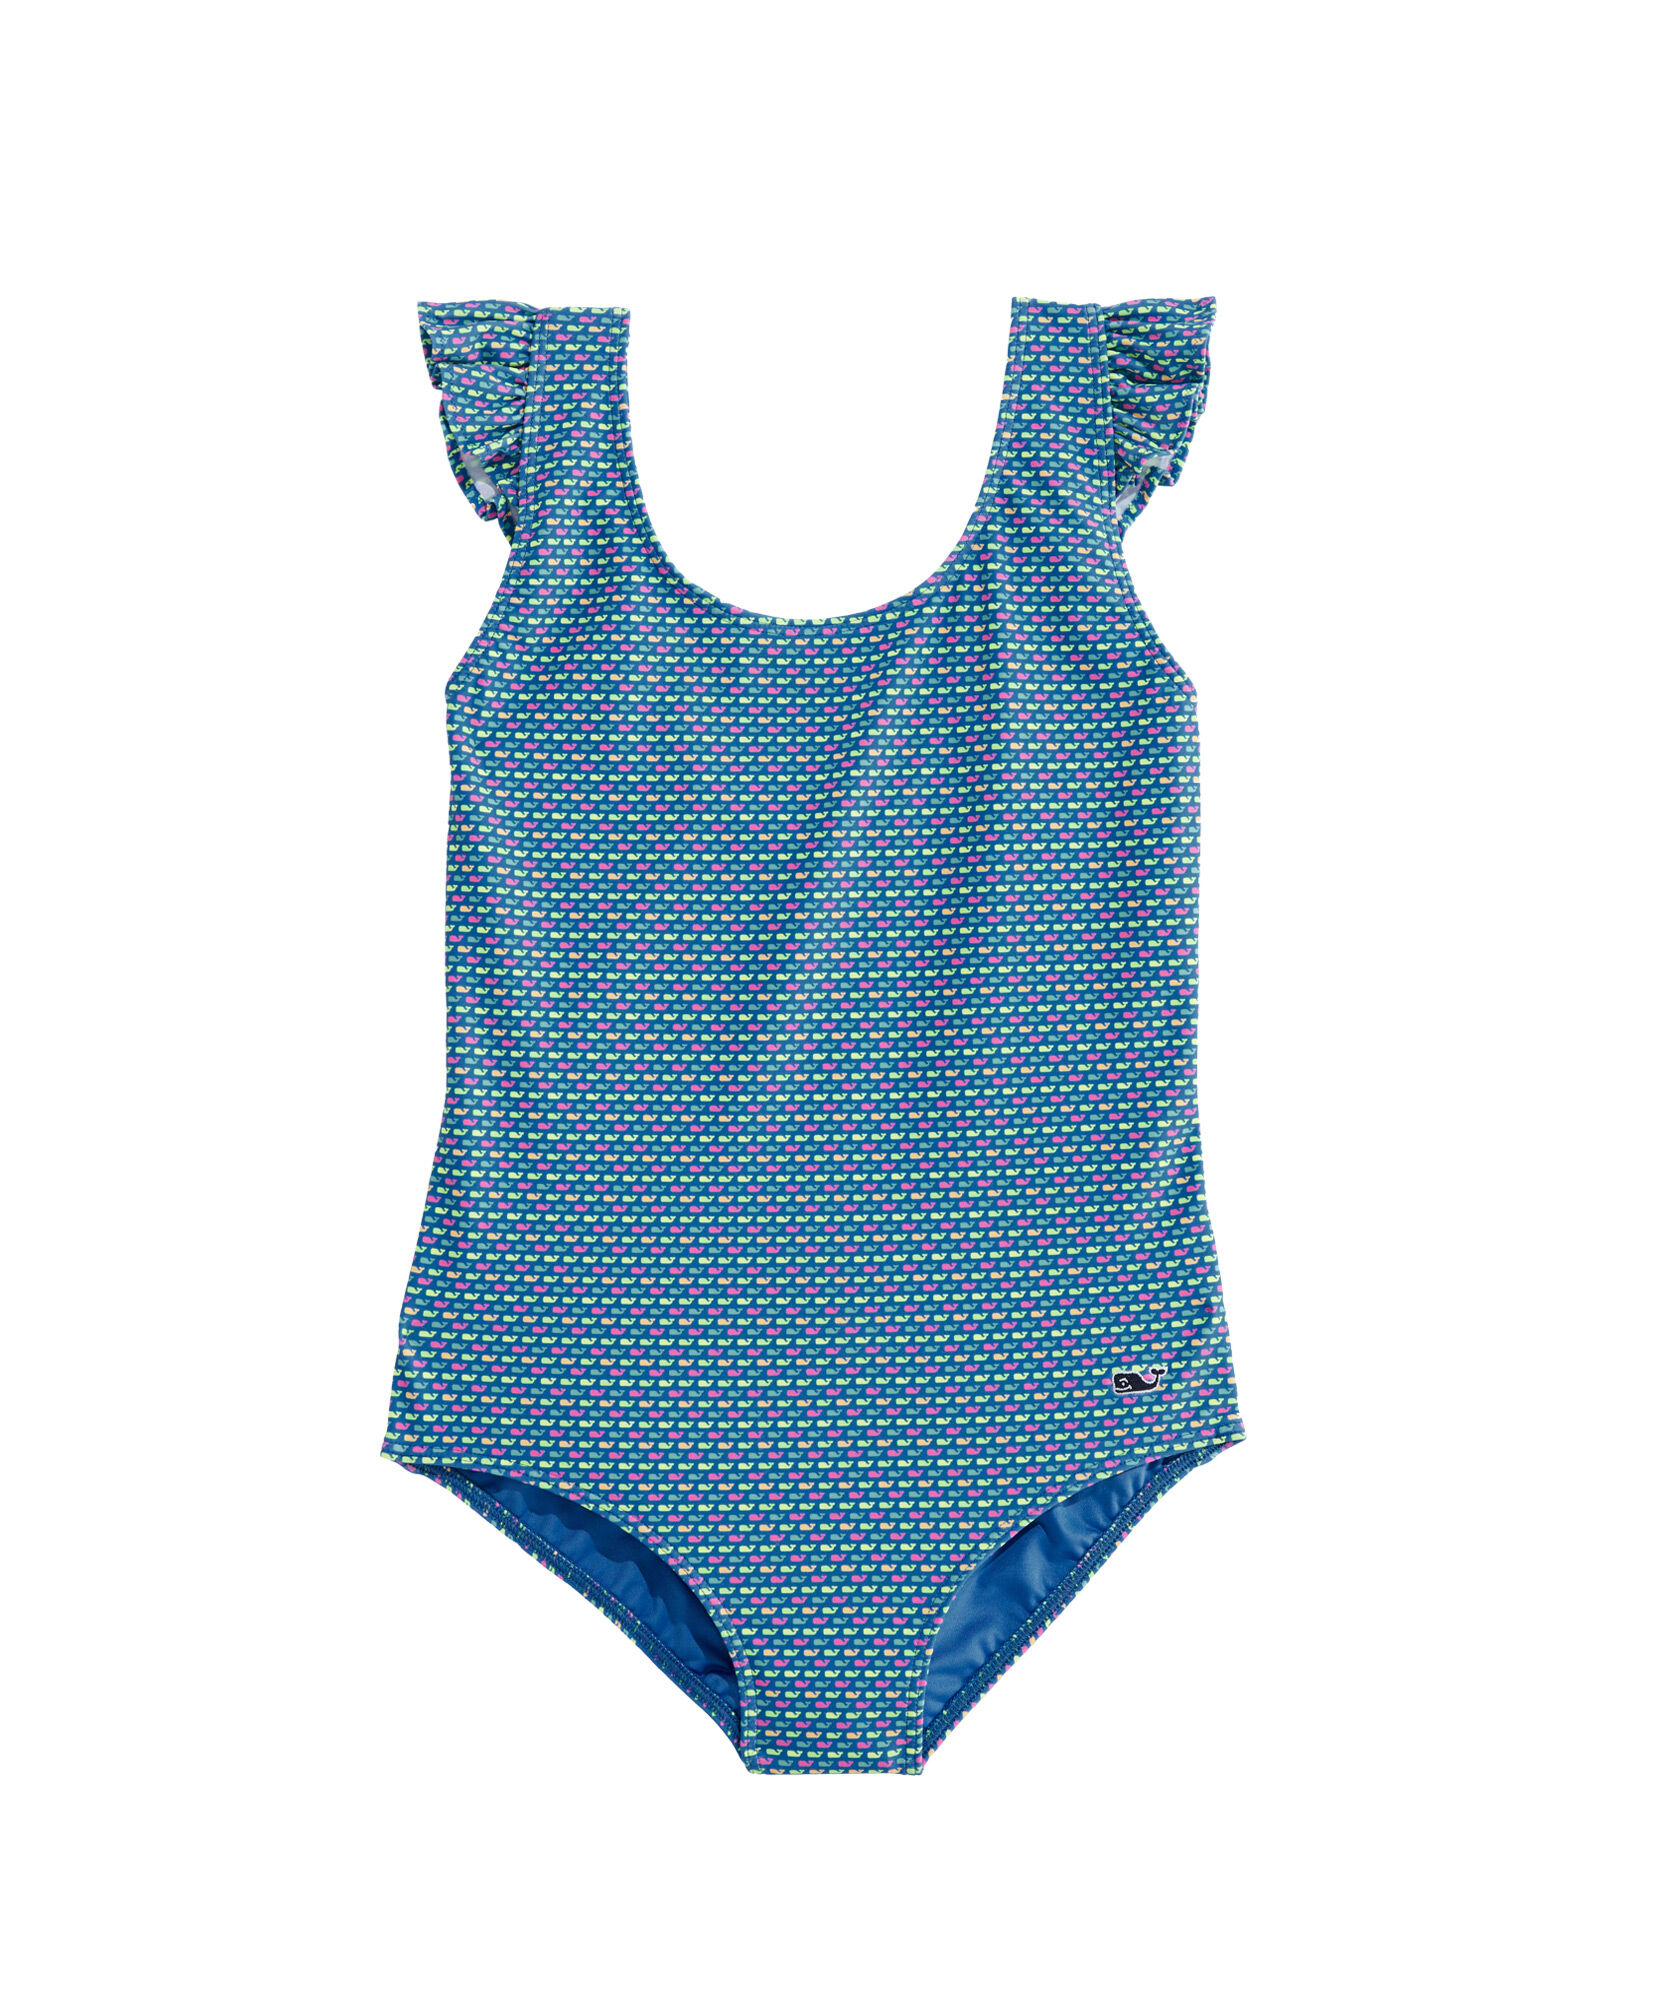 OUTLET Girls' Printed One-Piece